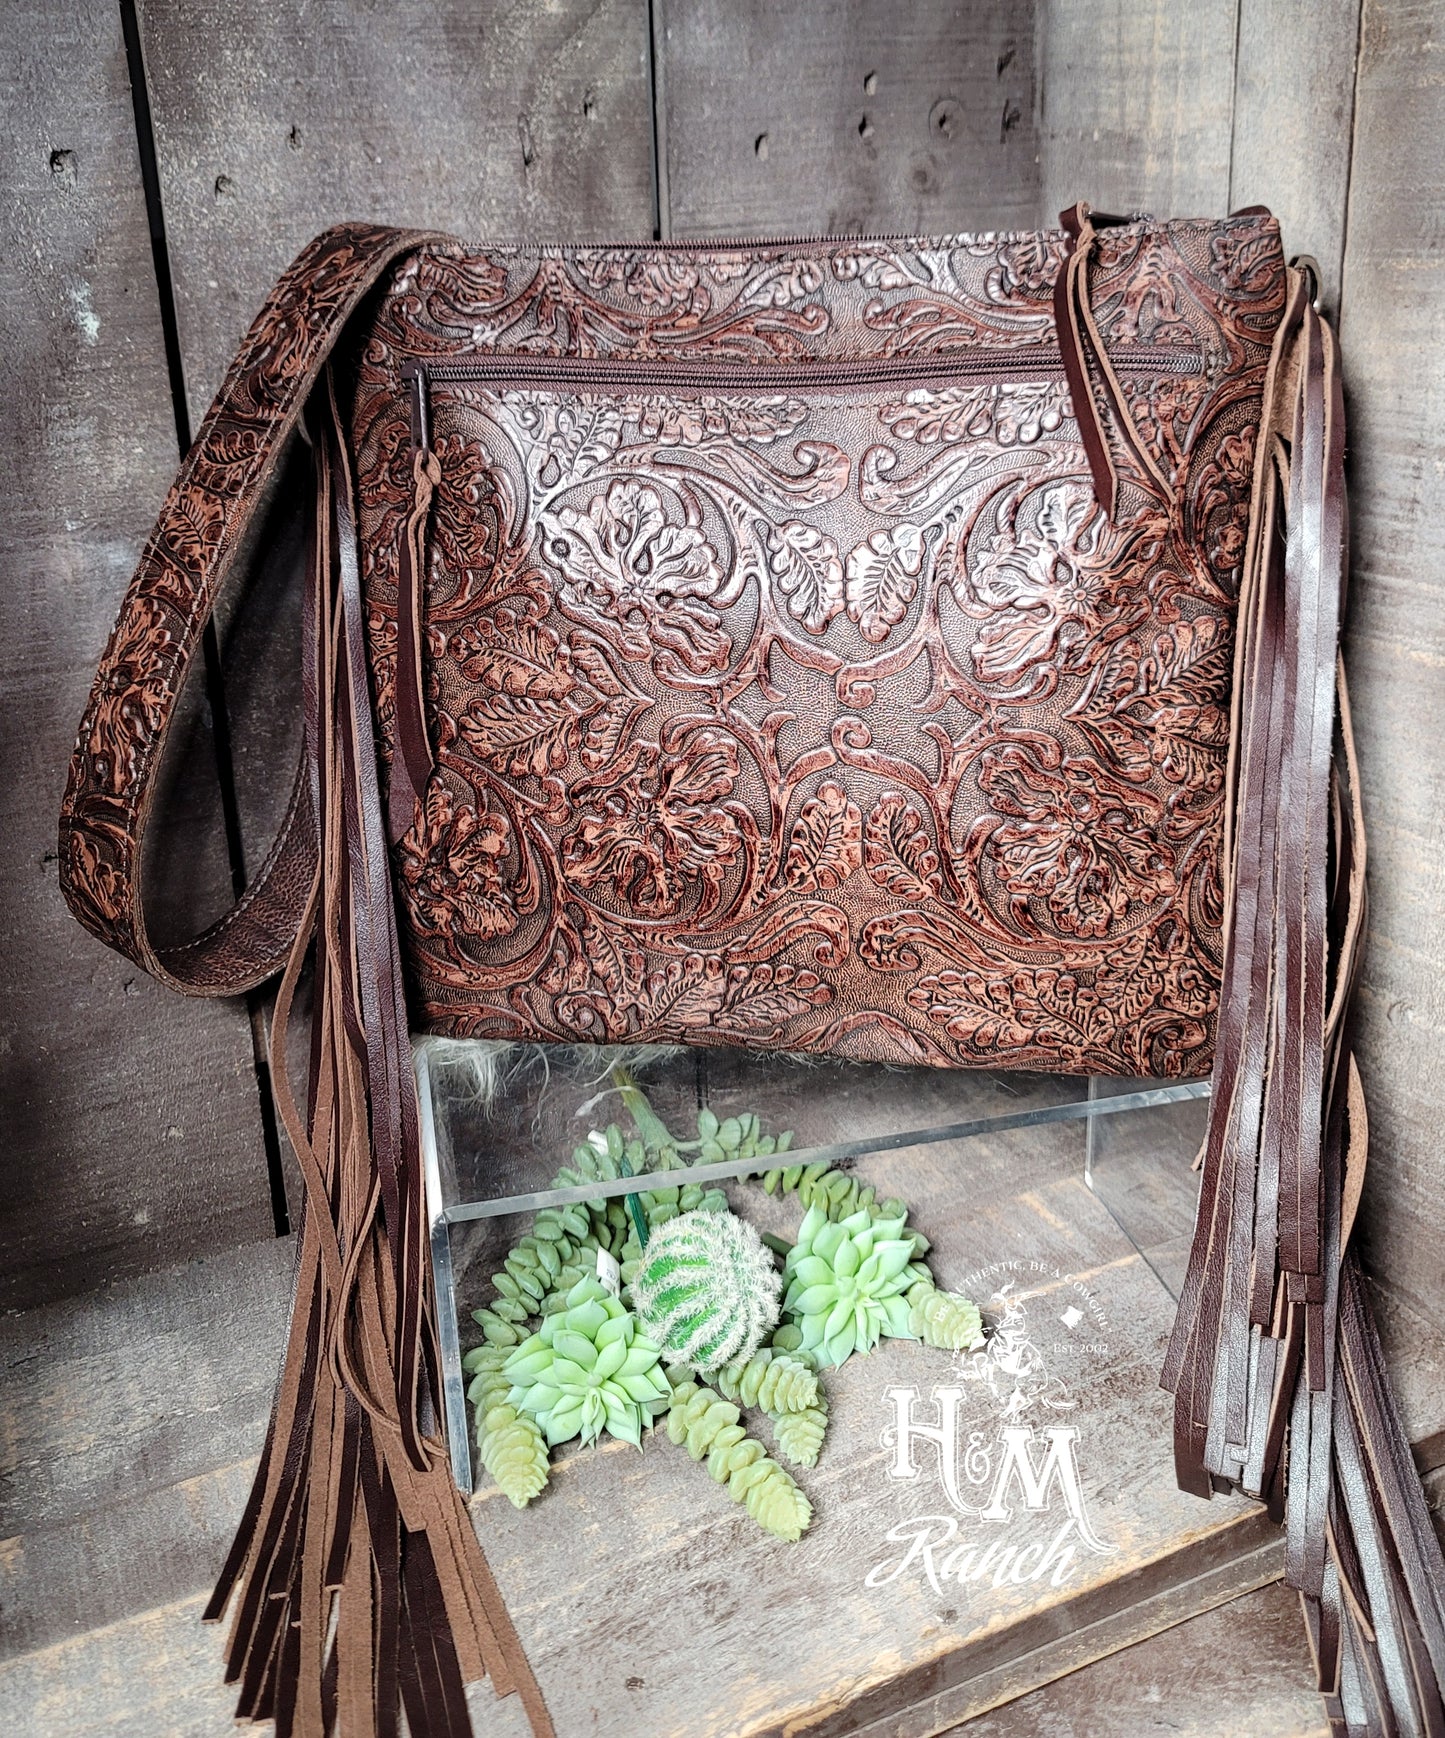 Mid Rise, Angora Wooly w/Cowboy Tooled Leather #1